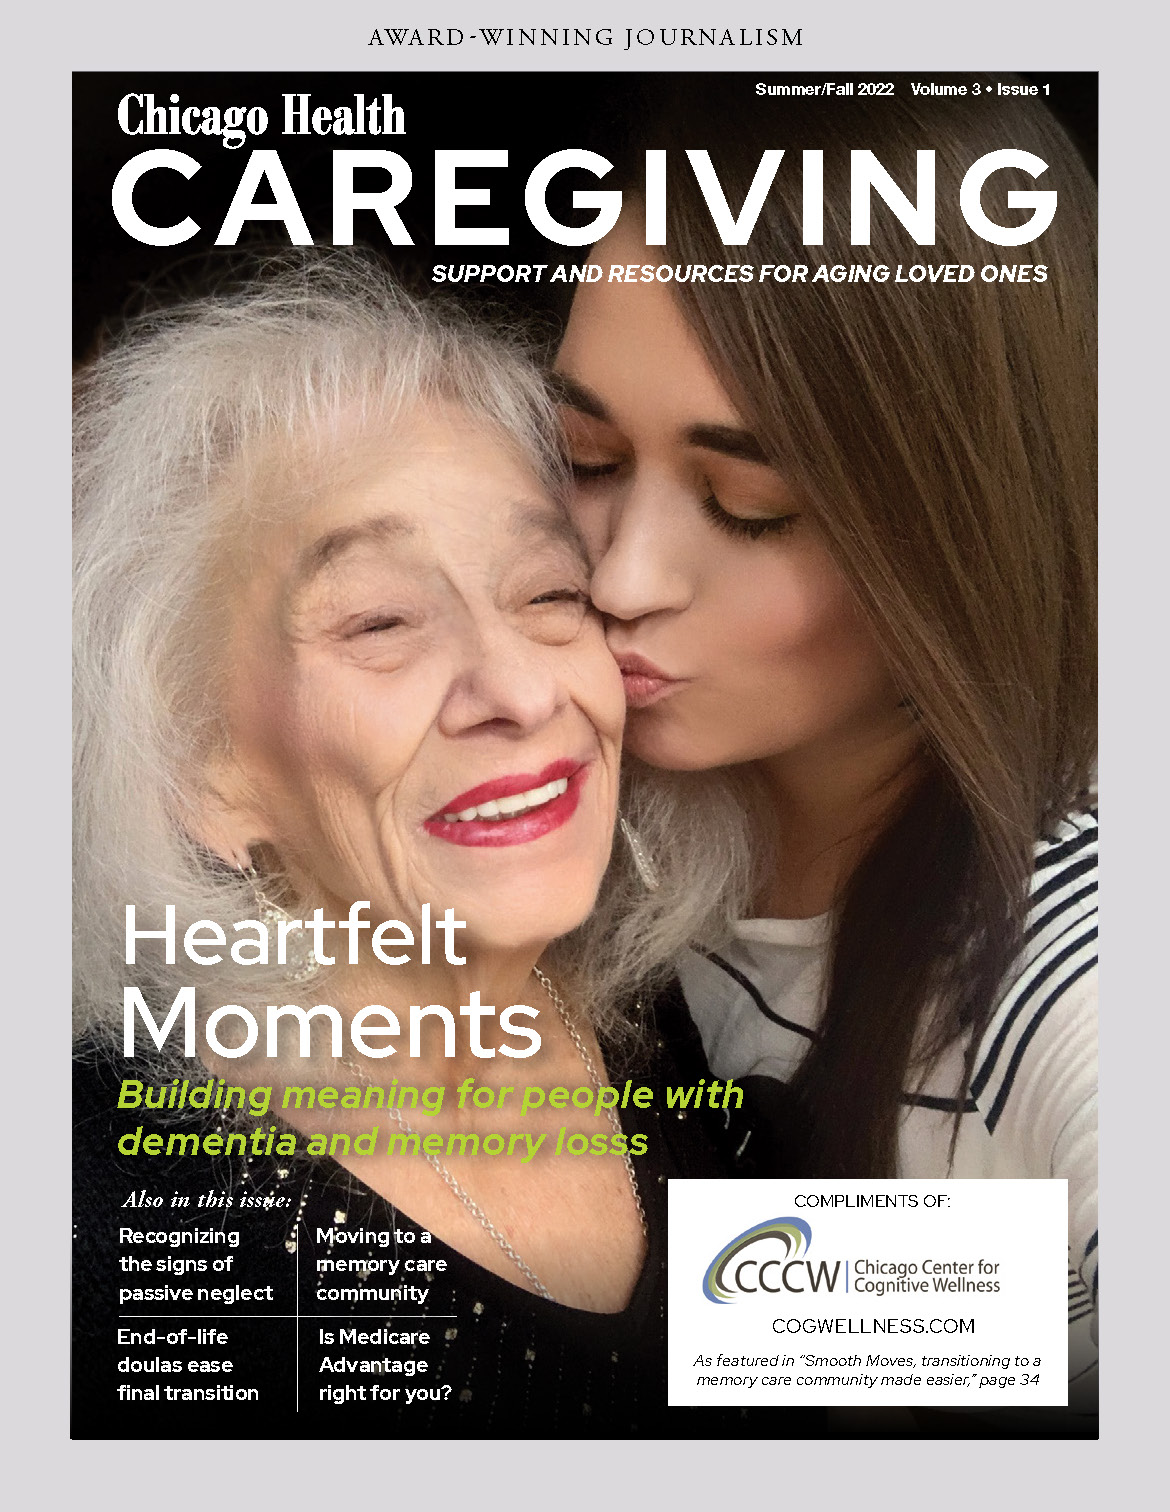 Chicago Health cover featuring the Chicago Center for Cognitive Wellness